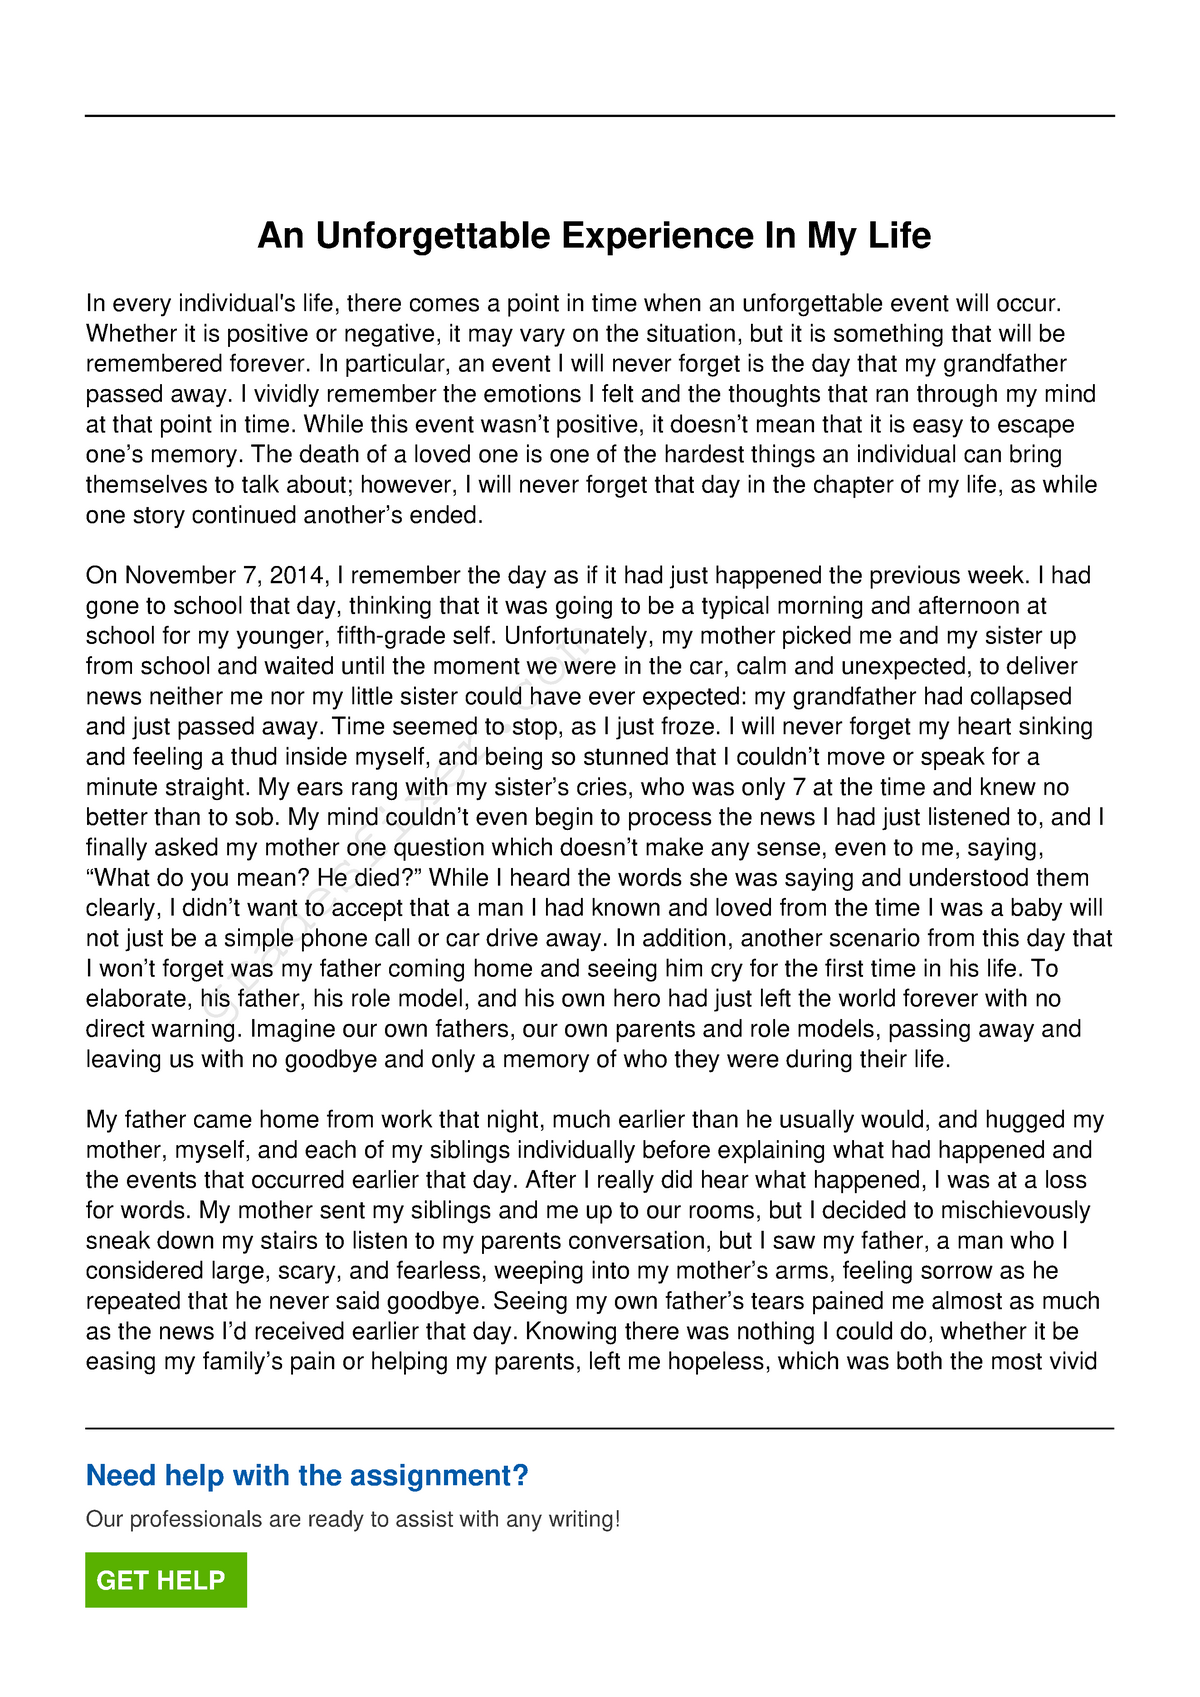 essay about bad experience in life